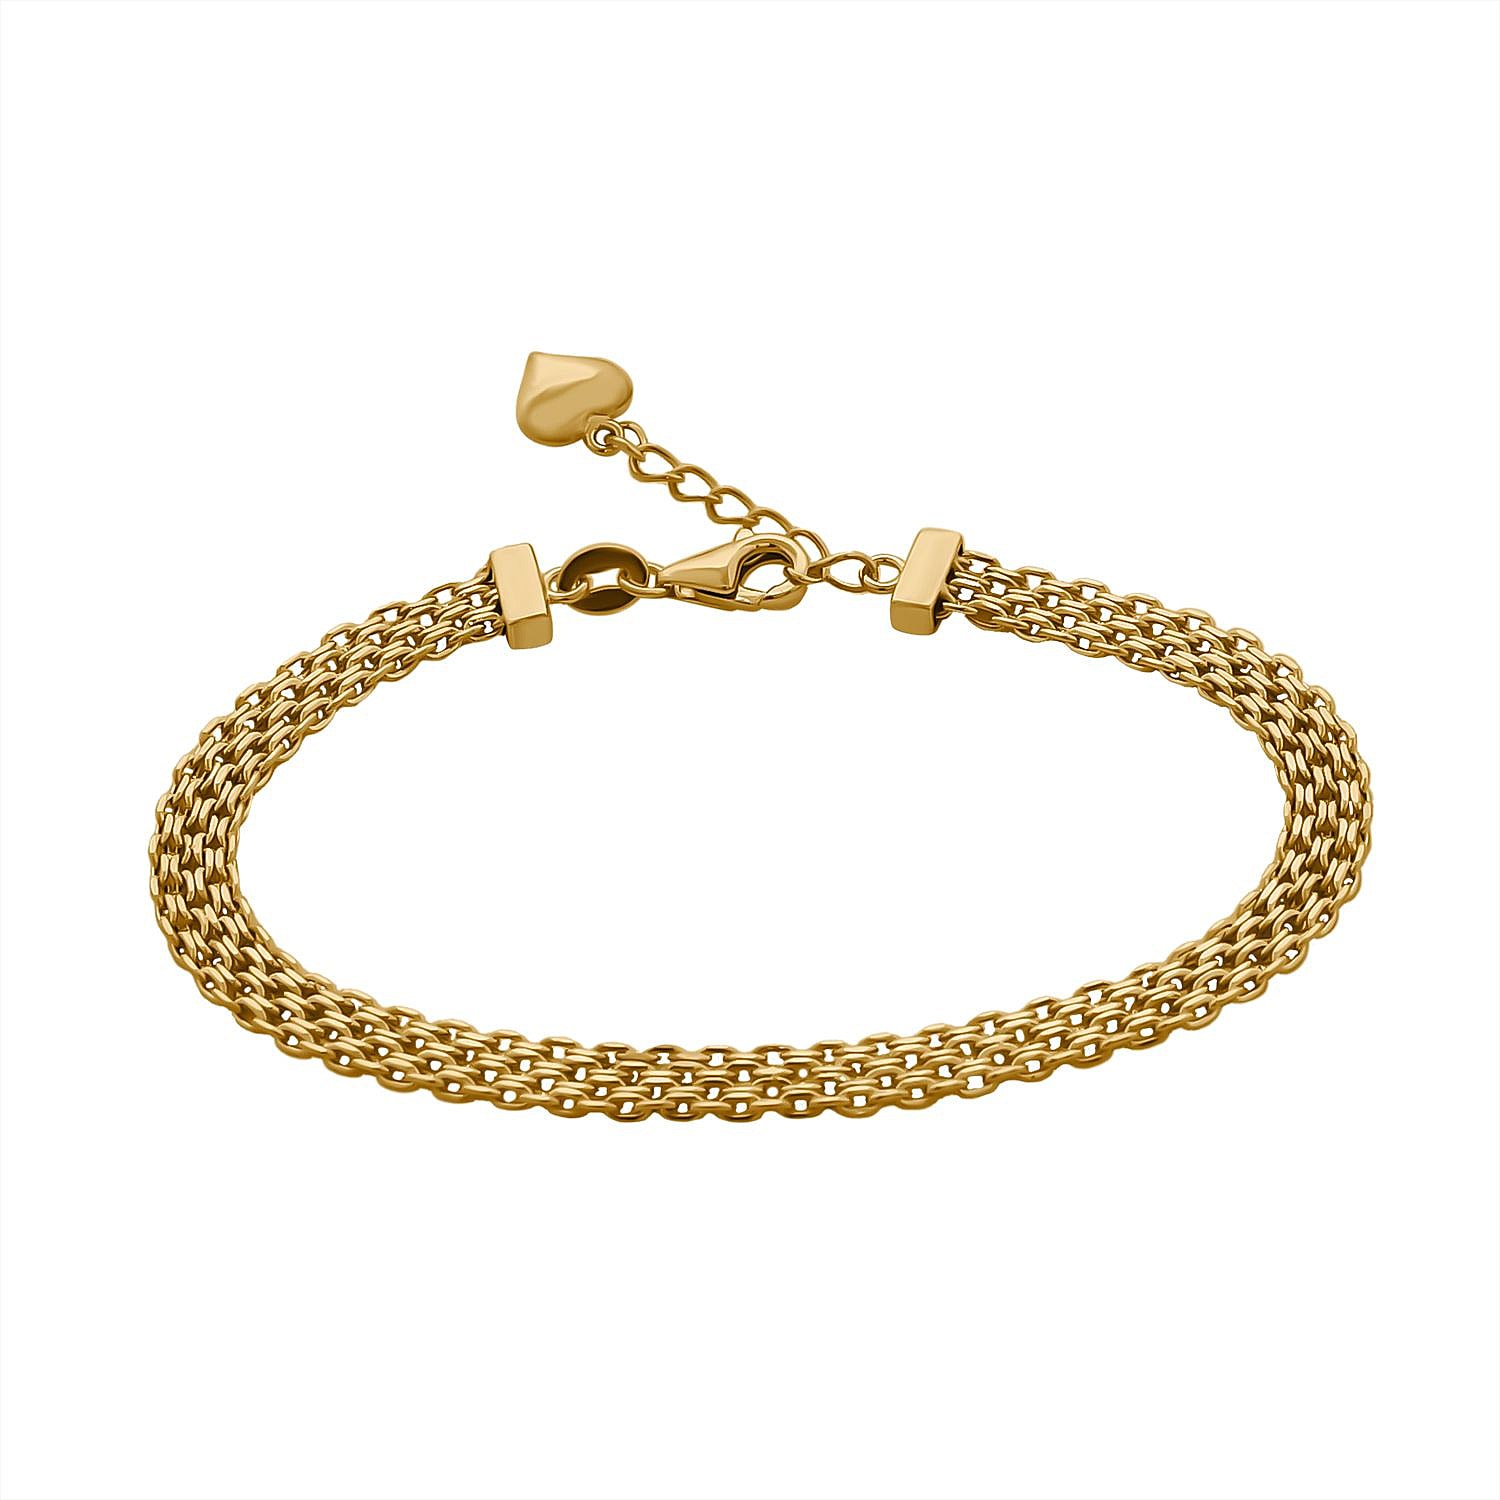 Vicenza Collection- 9K Yellow Gold Panther Link Bracelet (Size 7-1 Inch Ext.), Gold Wt 3.38 Gms